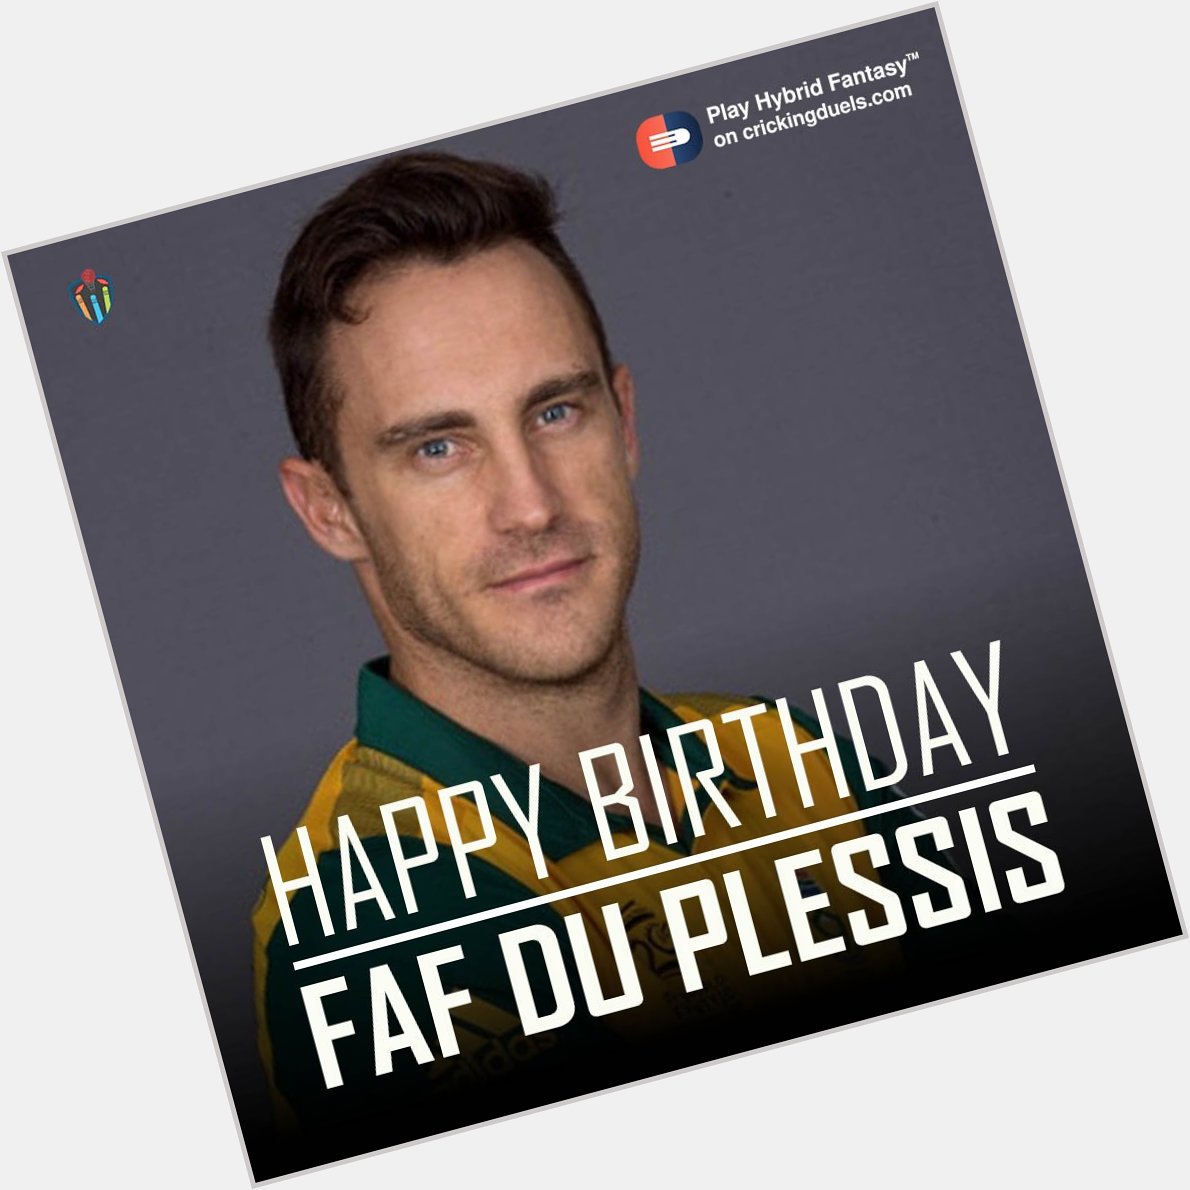 Happy Birthday Faf du Plessis. The South African cricketer turns 33 today. 